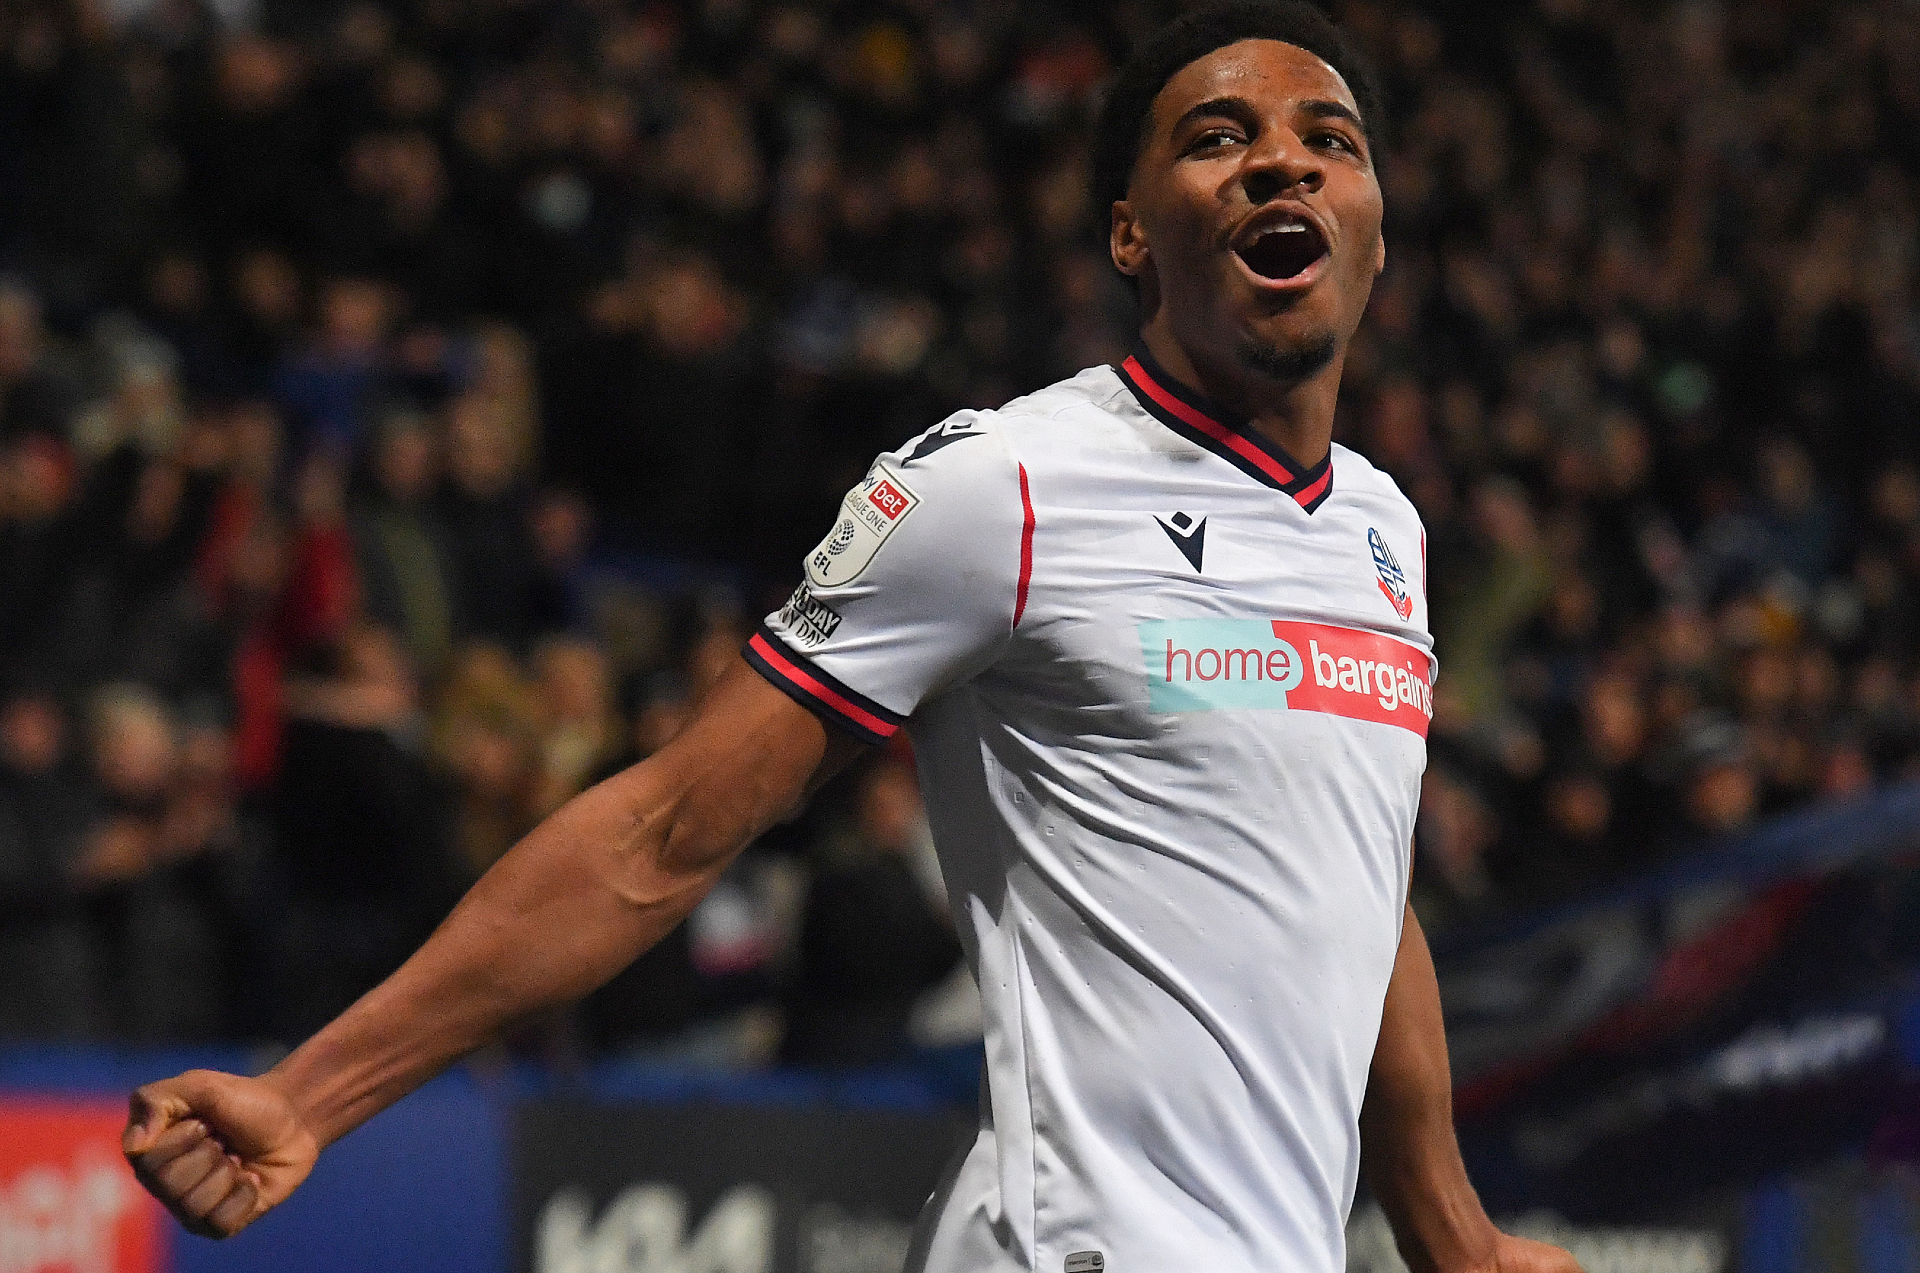 Bolton Wanderers boss reveals interest in top stars like Rangers target Dapo Afolayan